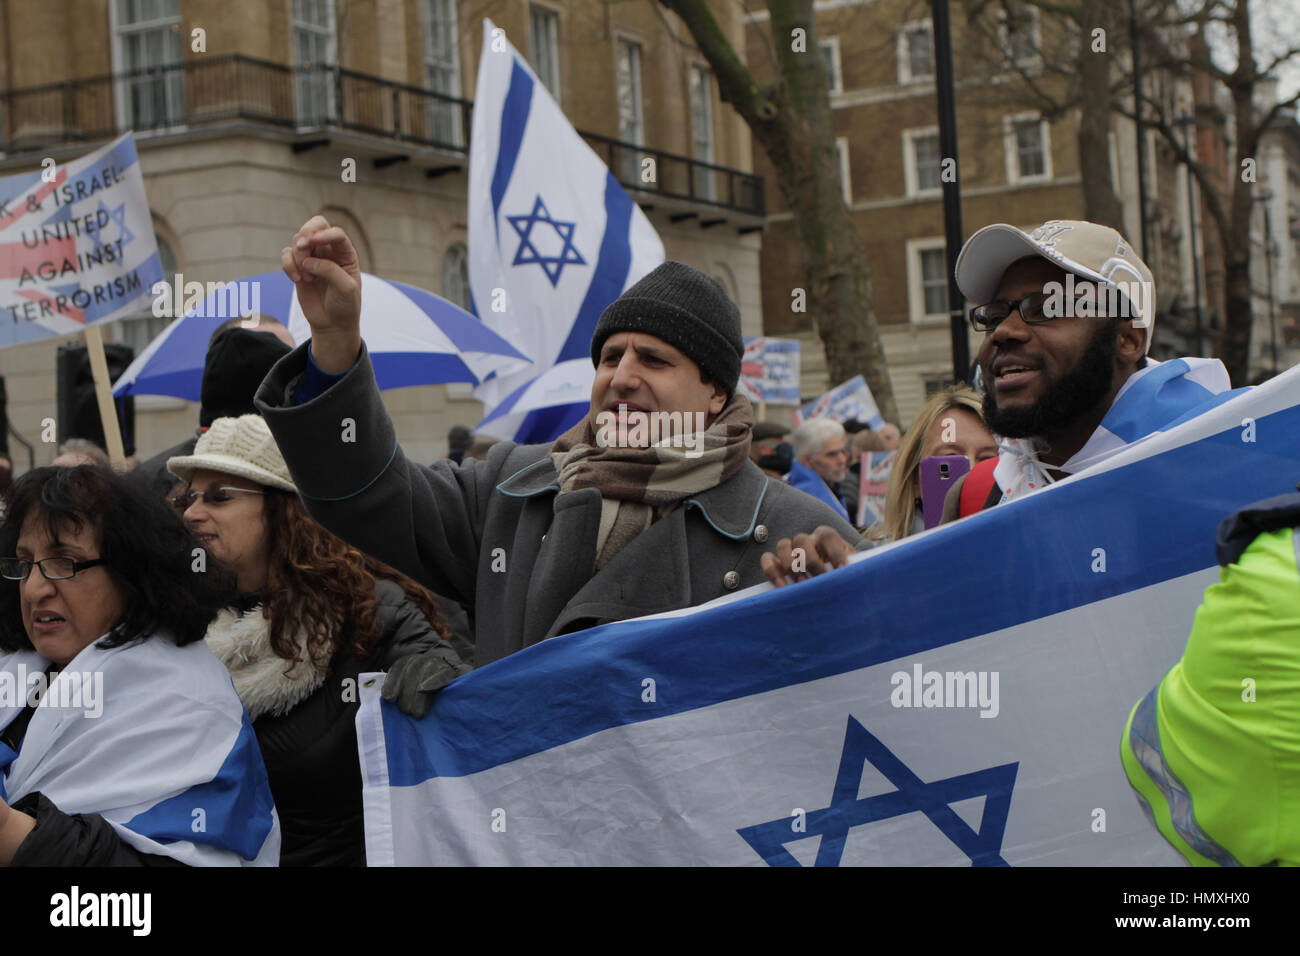 London, UK. 6th Feb, 2017. Pro-Israel supporters shout at pro-Palestine protestors on Downing Street during the visit of Israeli Prime Minister Benjamin Netanyahu. Credit: jonathan tait/Alamy Live News Stock Photo